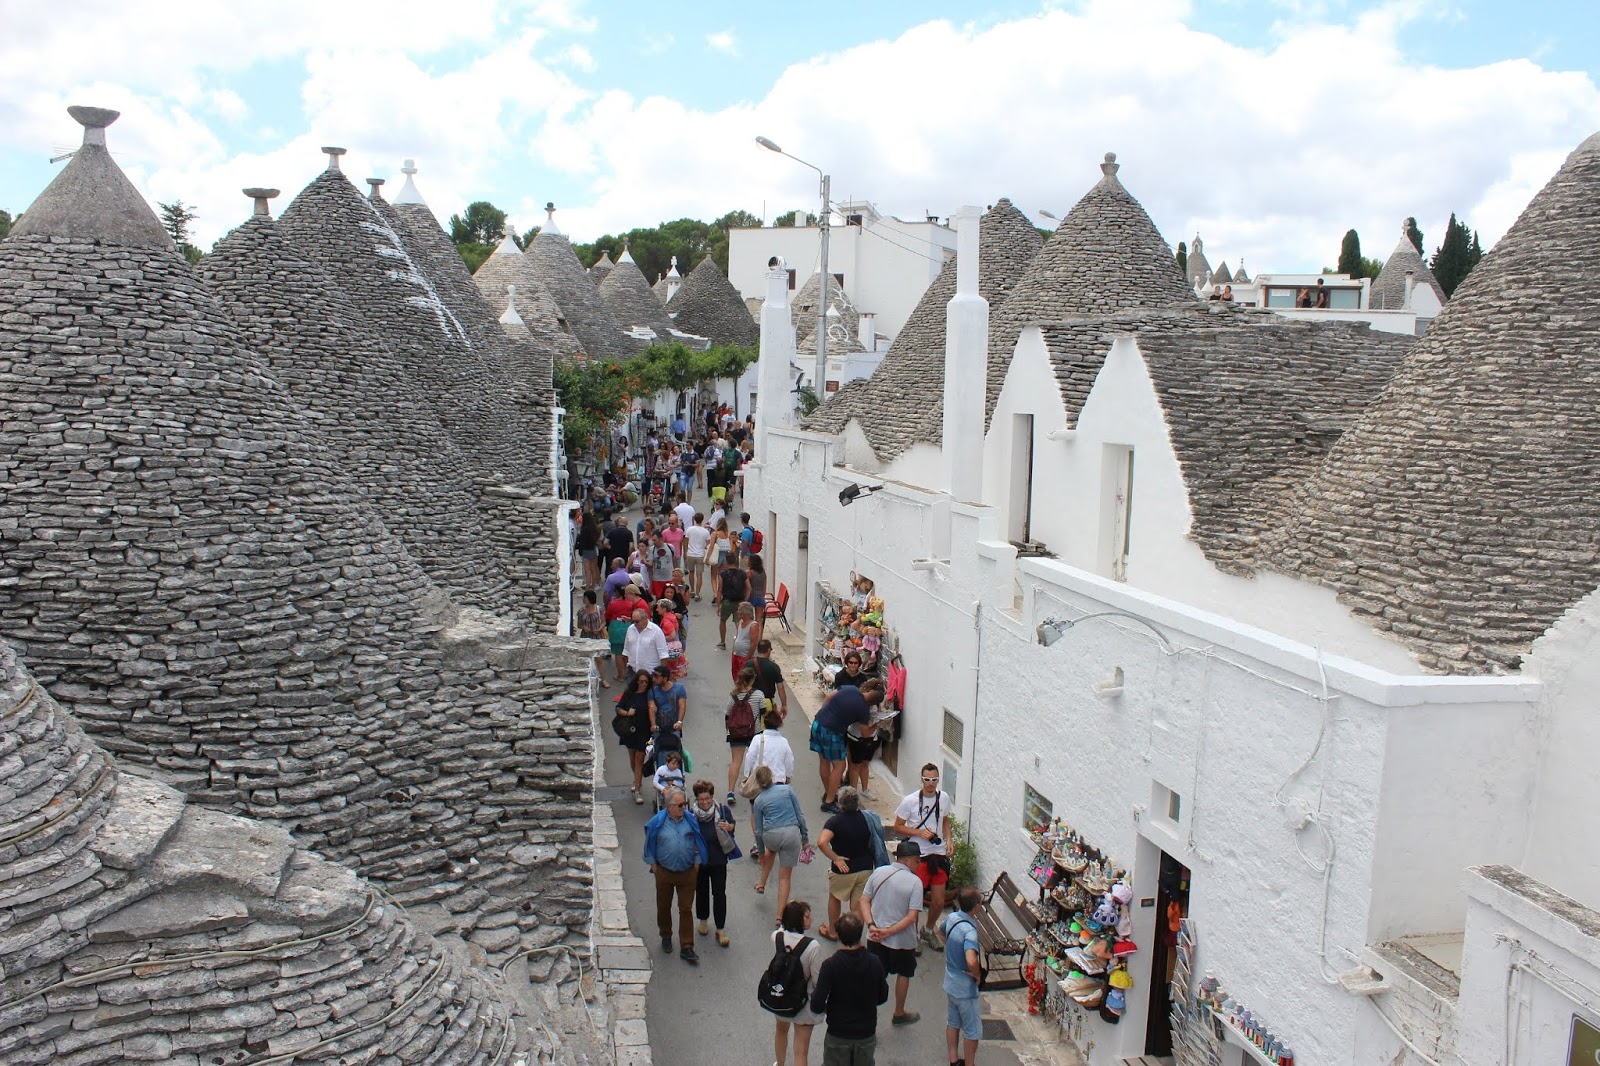 trulli houses for rent, trulli houses for sale, trulli italy images, trulli puglia images, how are trulli houses built, puglia, trulli with pool, trulli inside